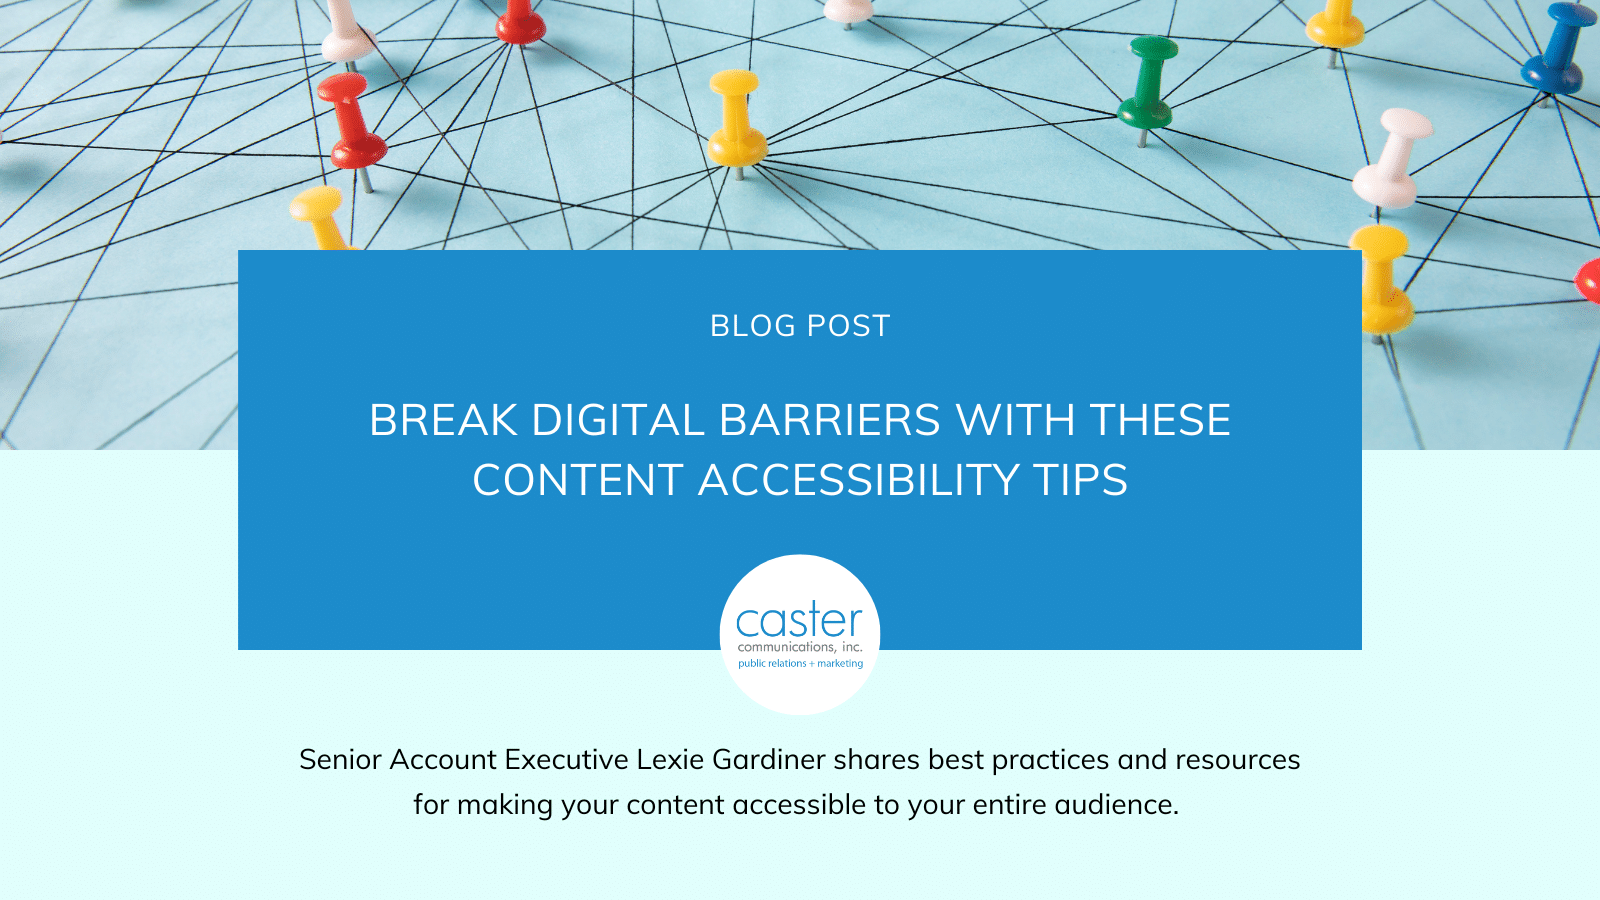 A header image for a blog post on accessibility for digital content. The image features a piece of paper with thumbtacks connecting a web, symbolizing unity and connection. A blue box contains text that reads, "Blog Post: Break Digital Barriers with These Content Accessibility Tips."